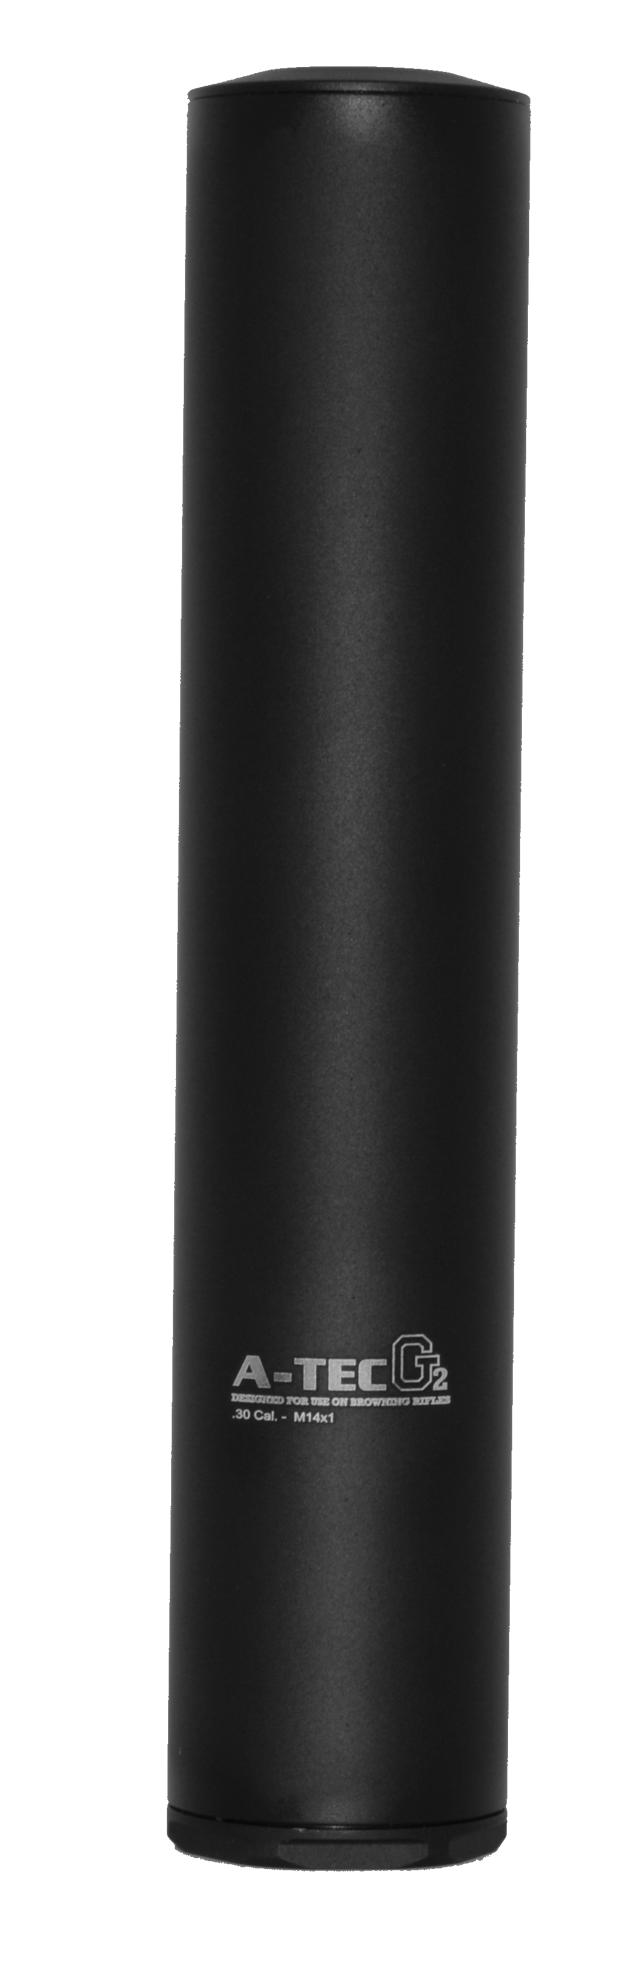 A-Tec G2 demper for Browning  223-6,5